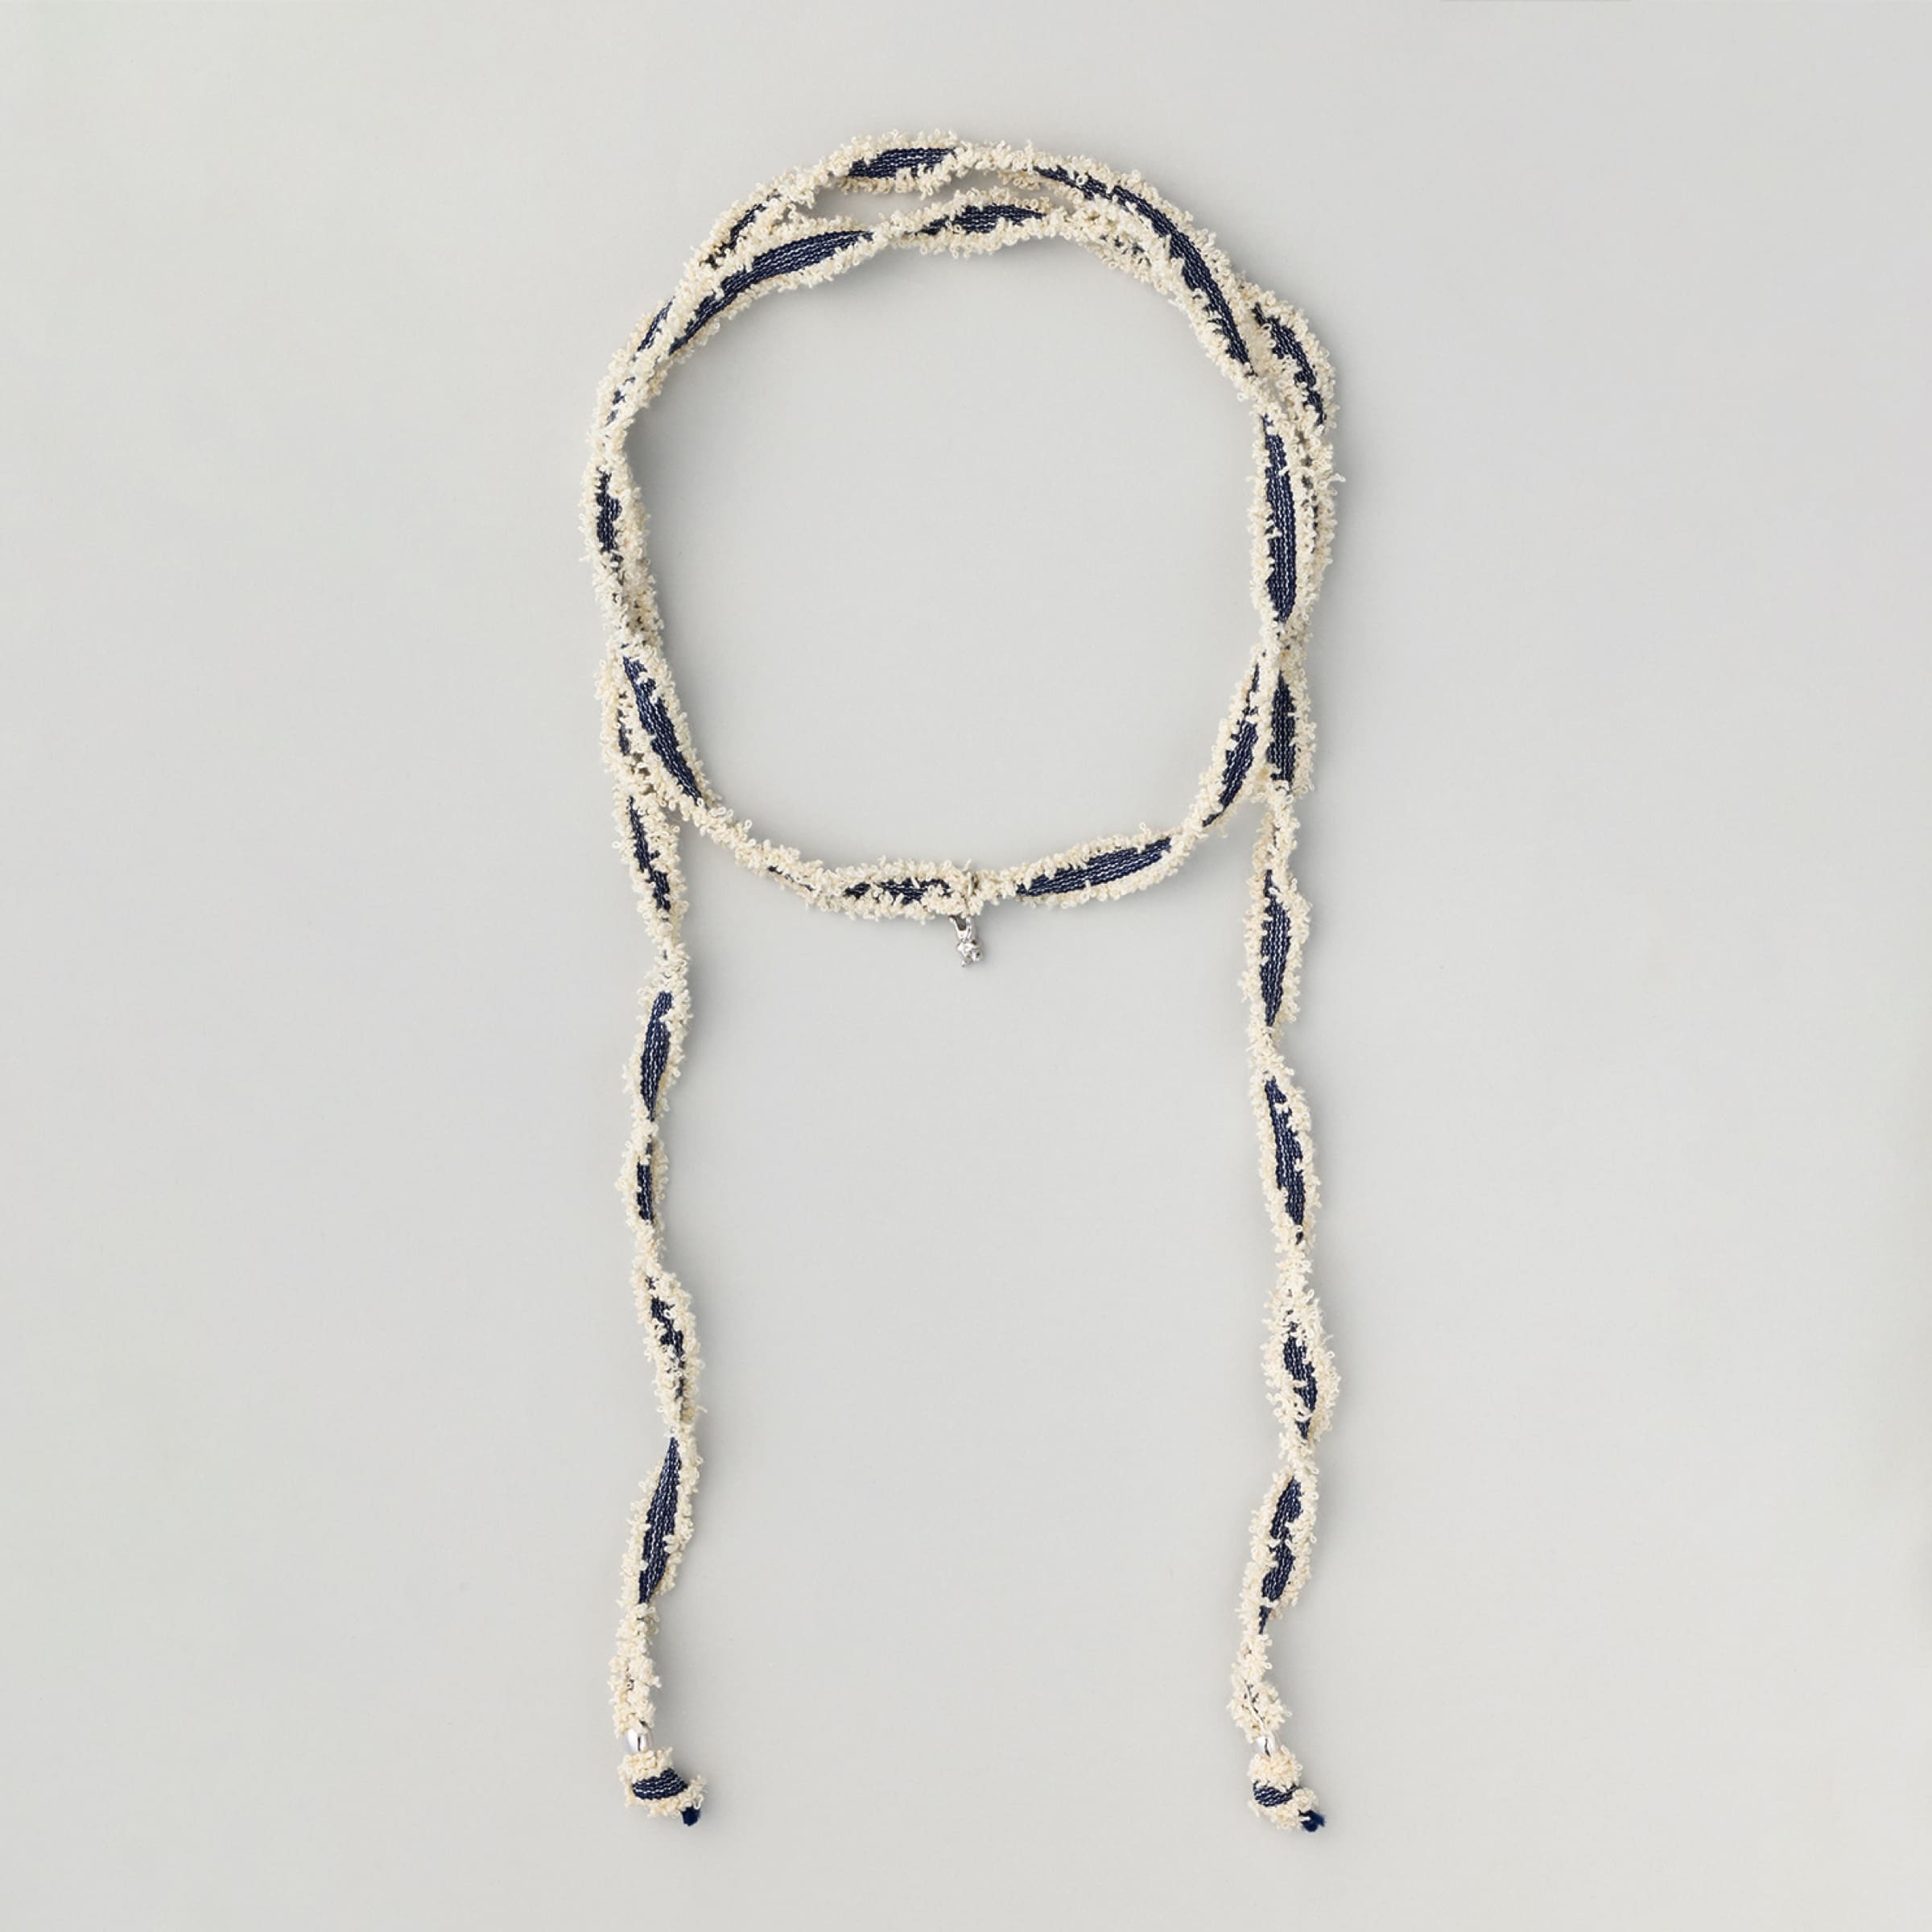 SOAPY バニー デニム チョーカー ネックレス / SOAPY BUNNY DENIM CHOKER NECKLACE